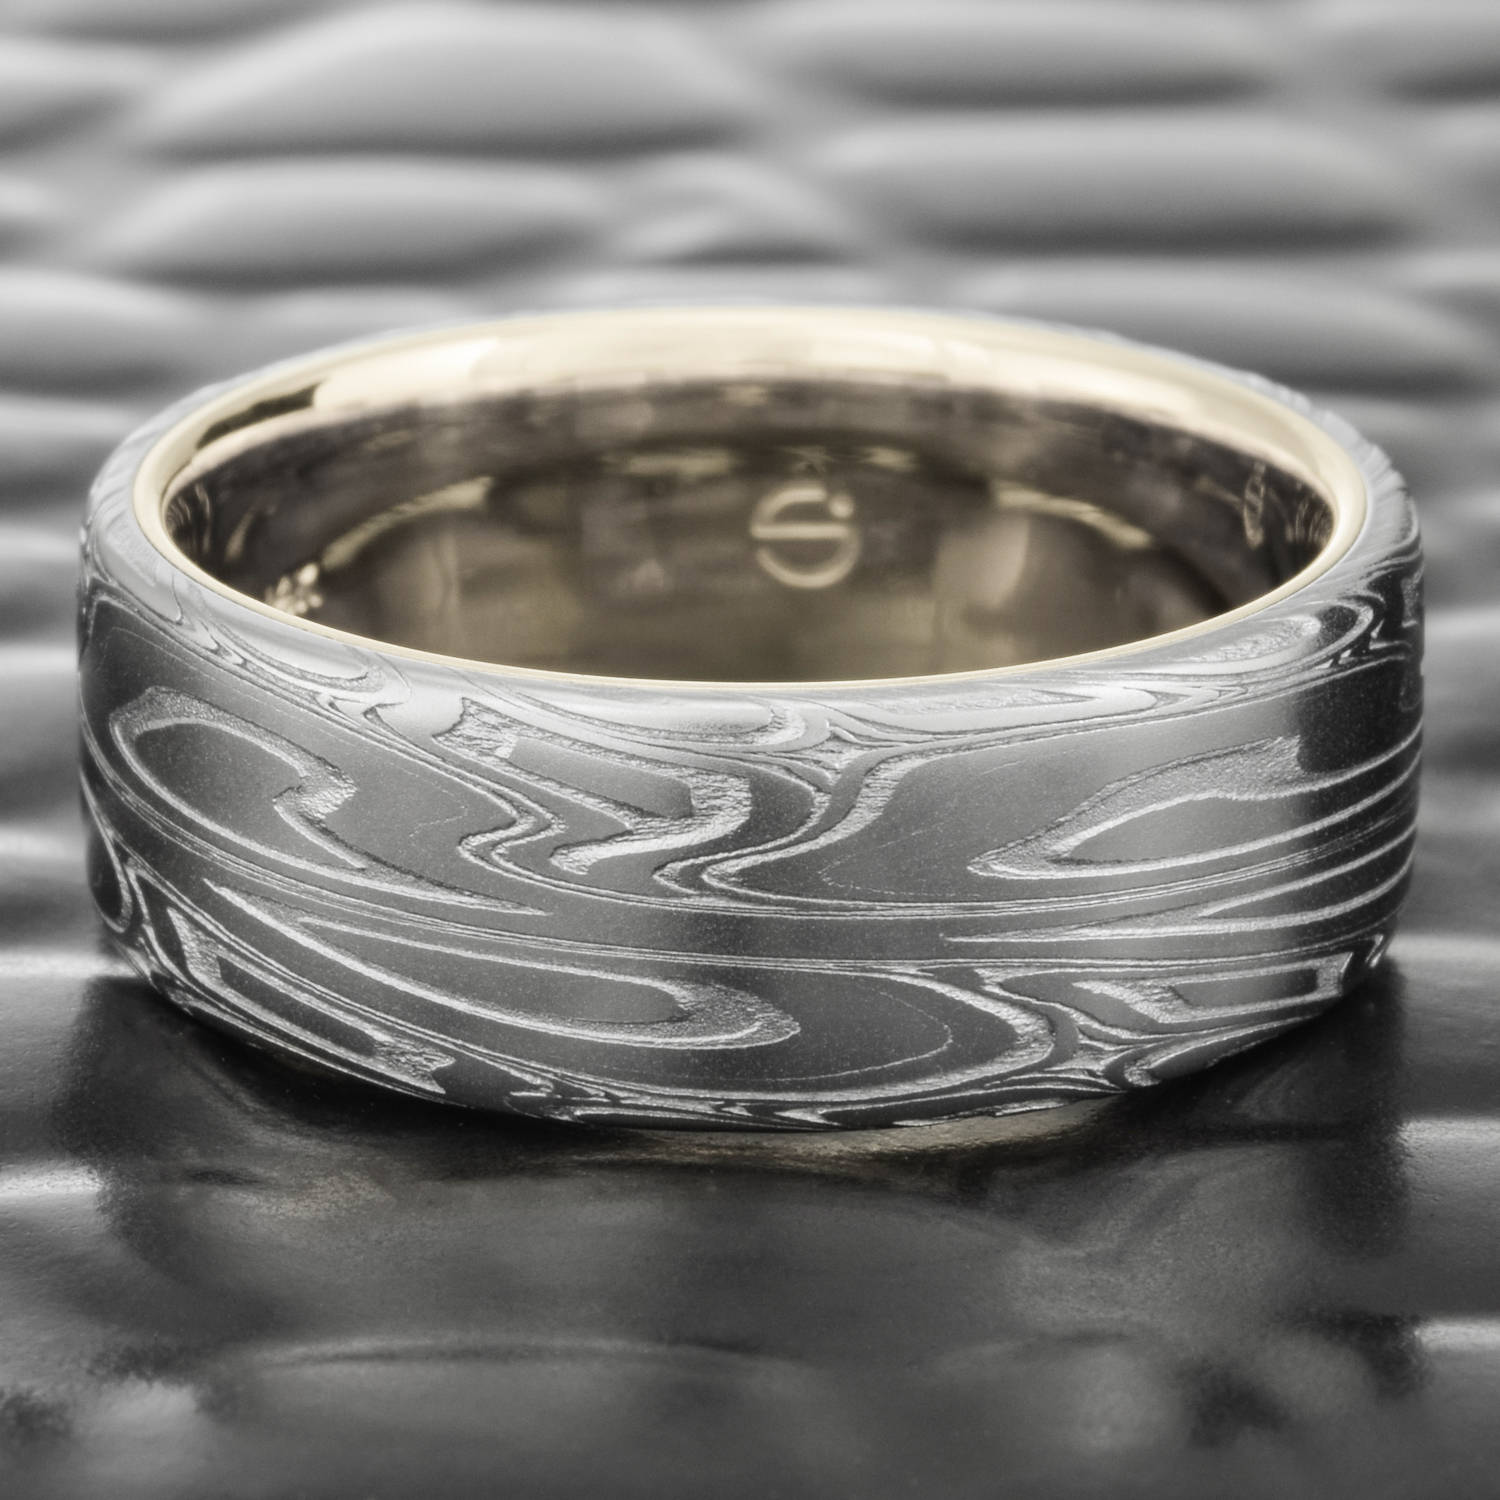 Flat Damascus Steel Ring with Offset 14K Rose Gold Inlay and Oxide Finish